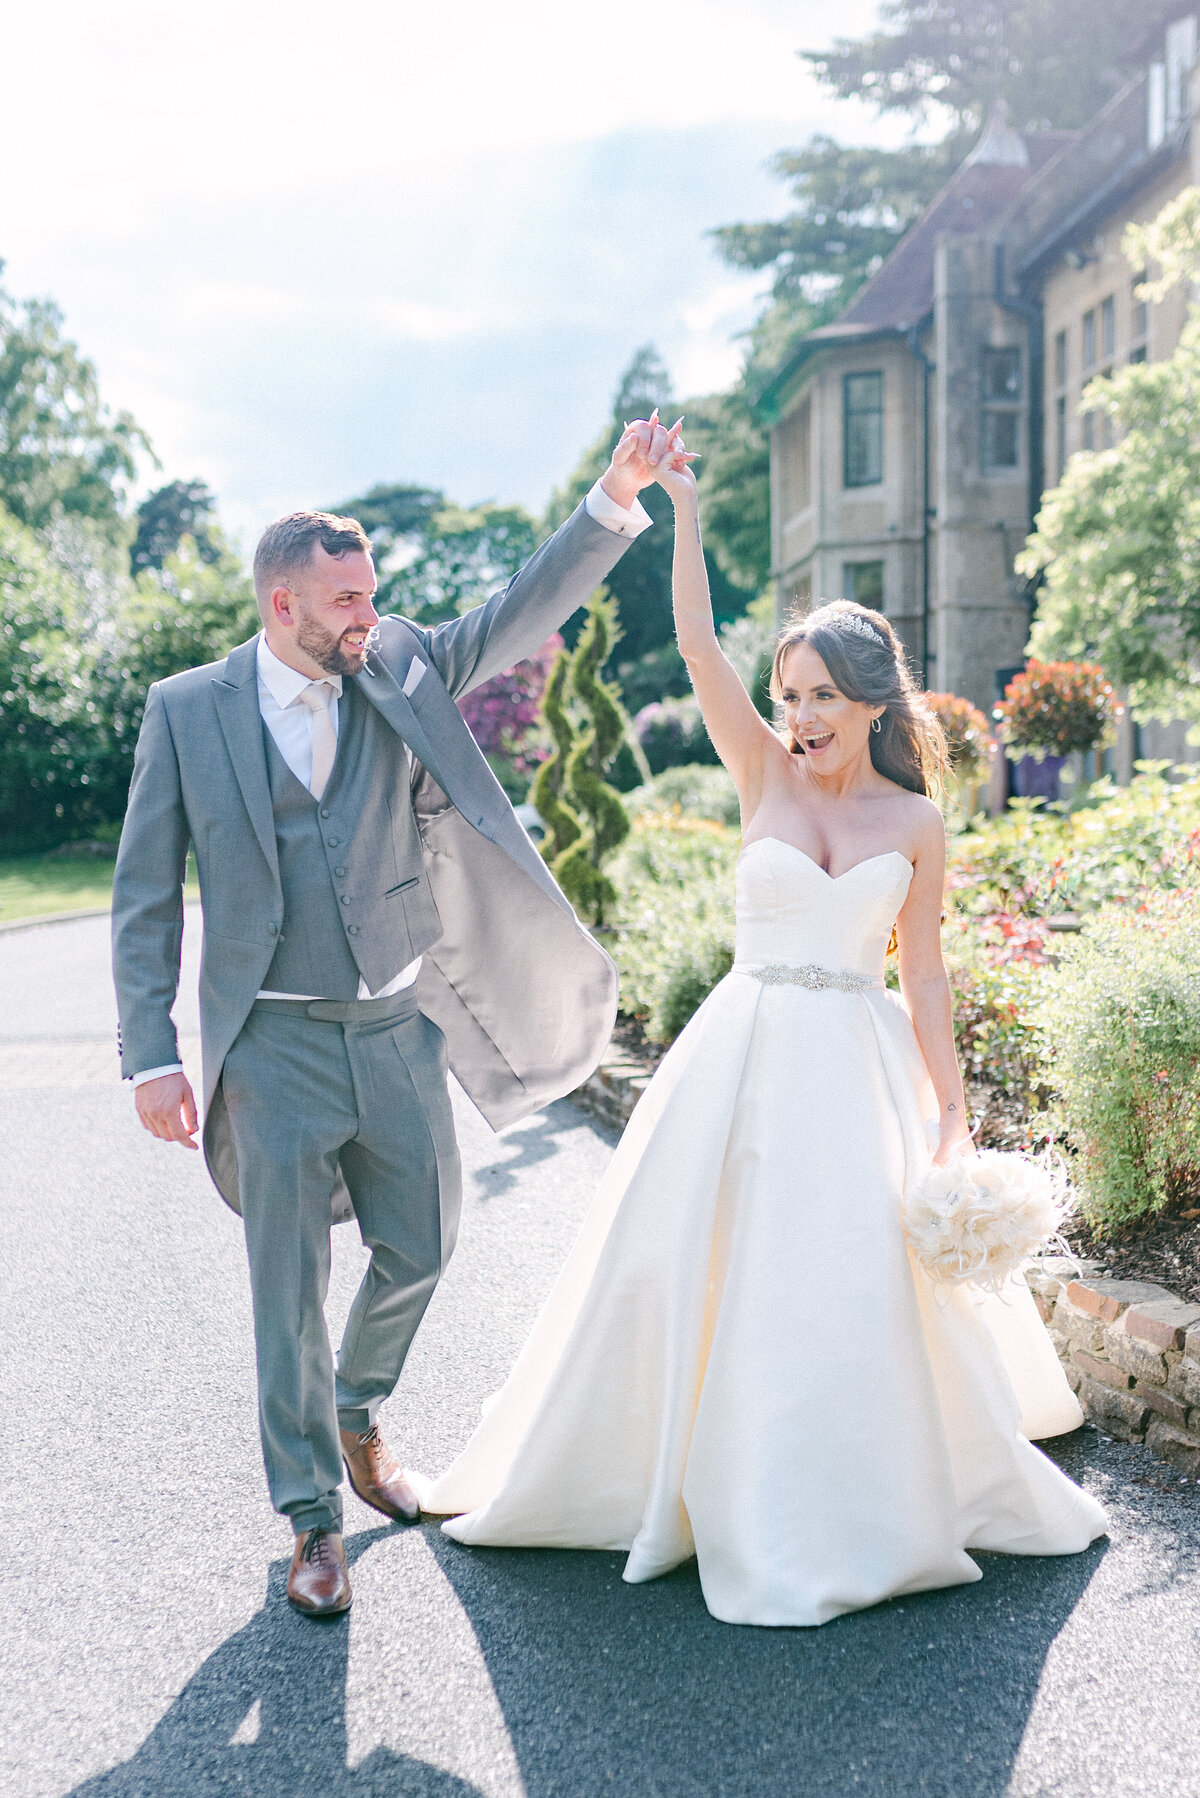 Bride and Groom walking together outside a surrey wedding venue hands in the air celebrating